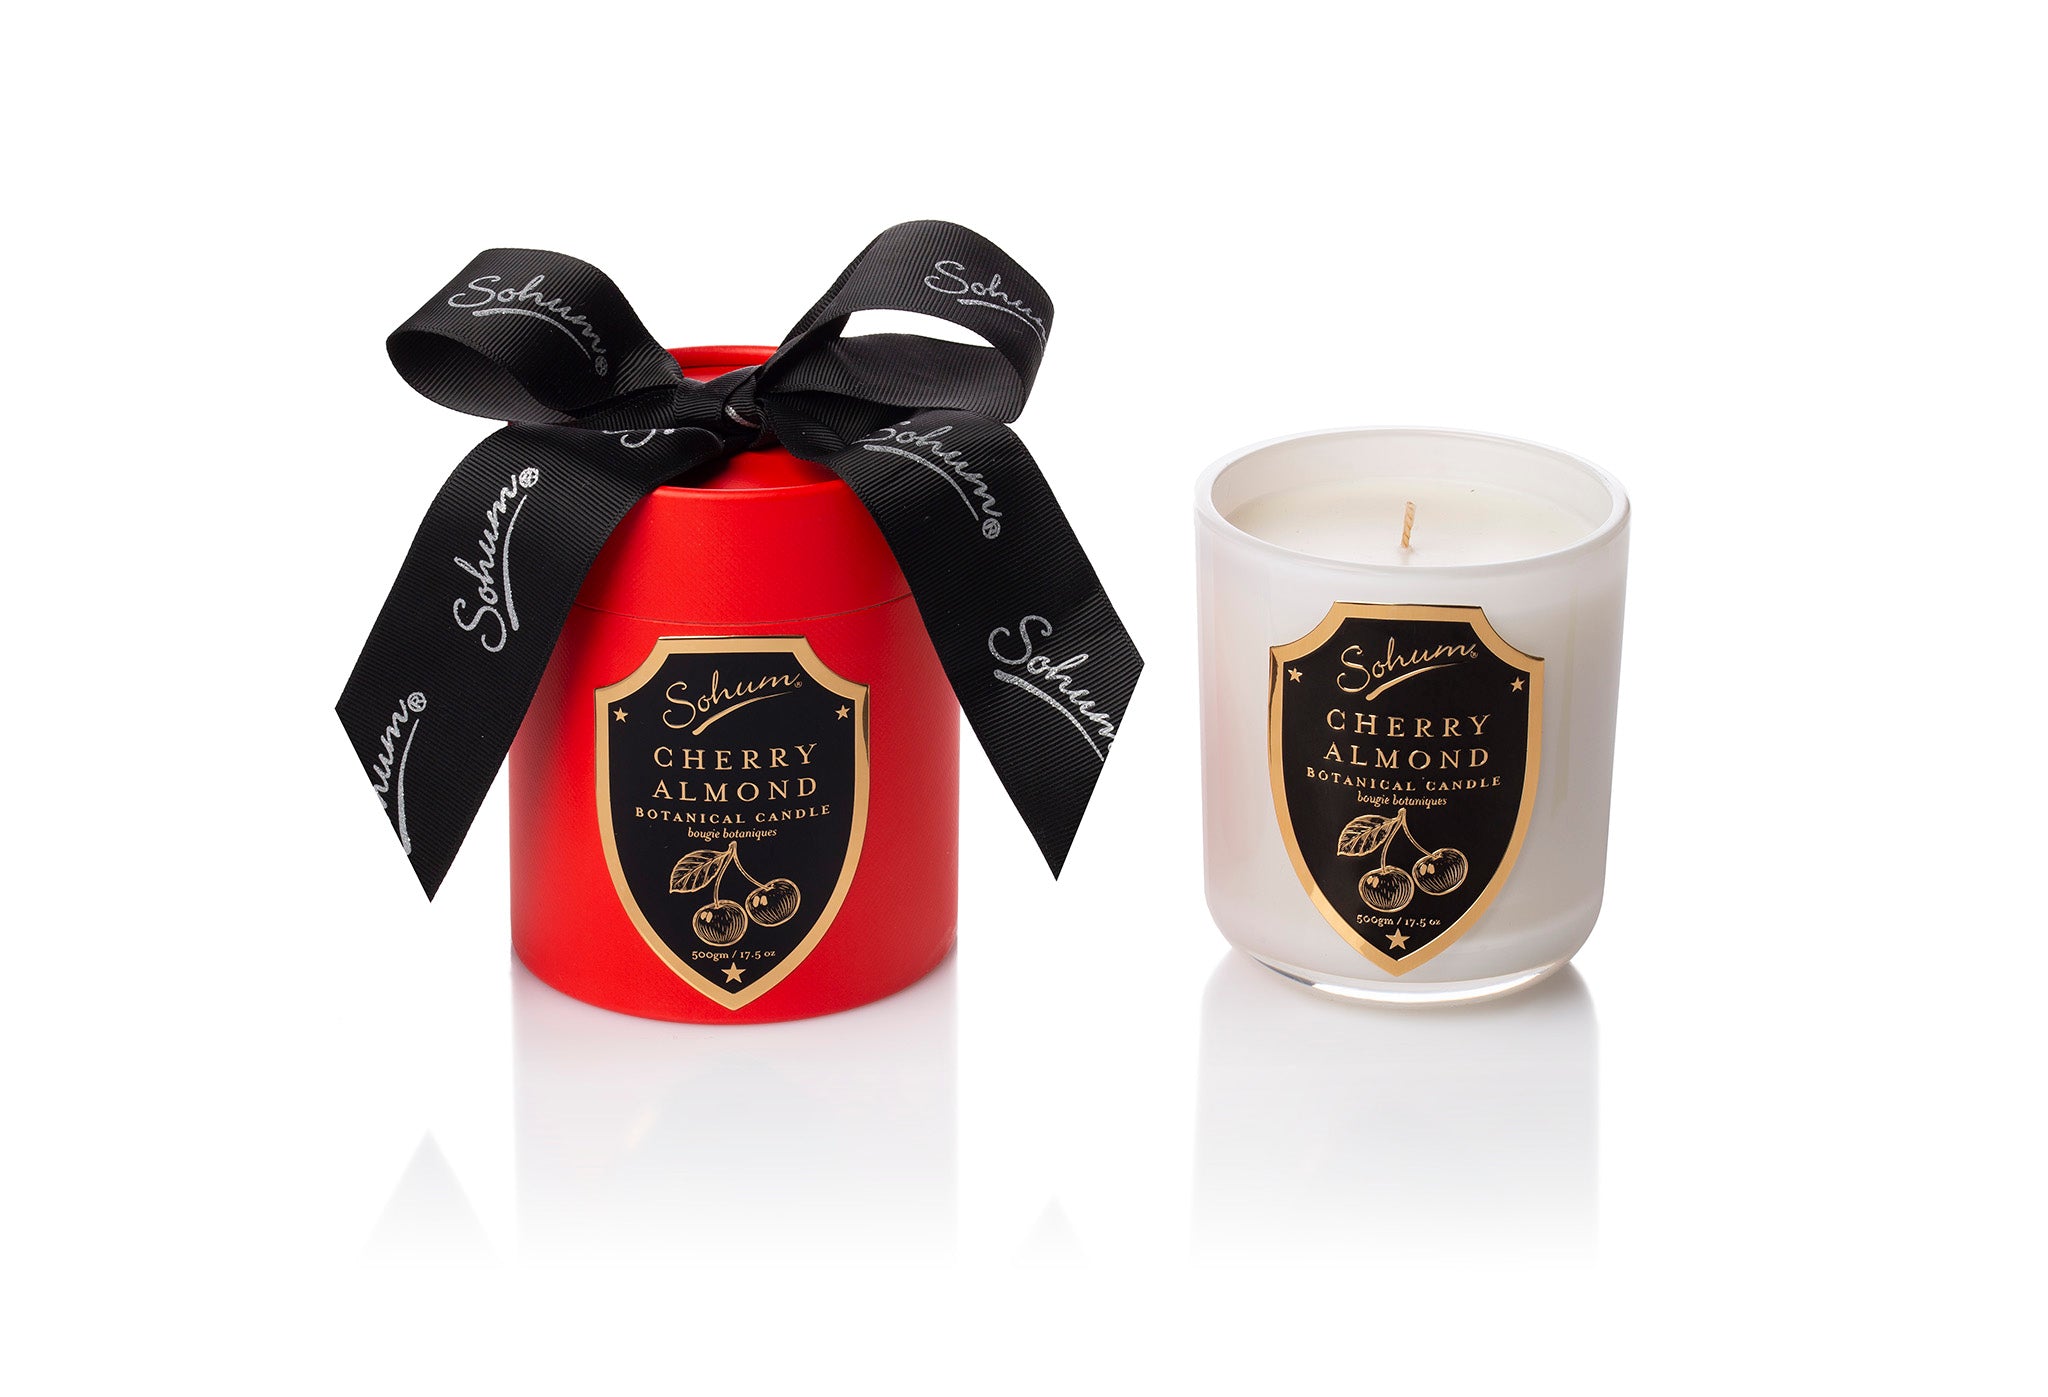 Cherry Almond Limited Edition Seasonal Candle